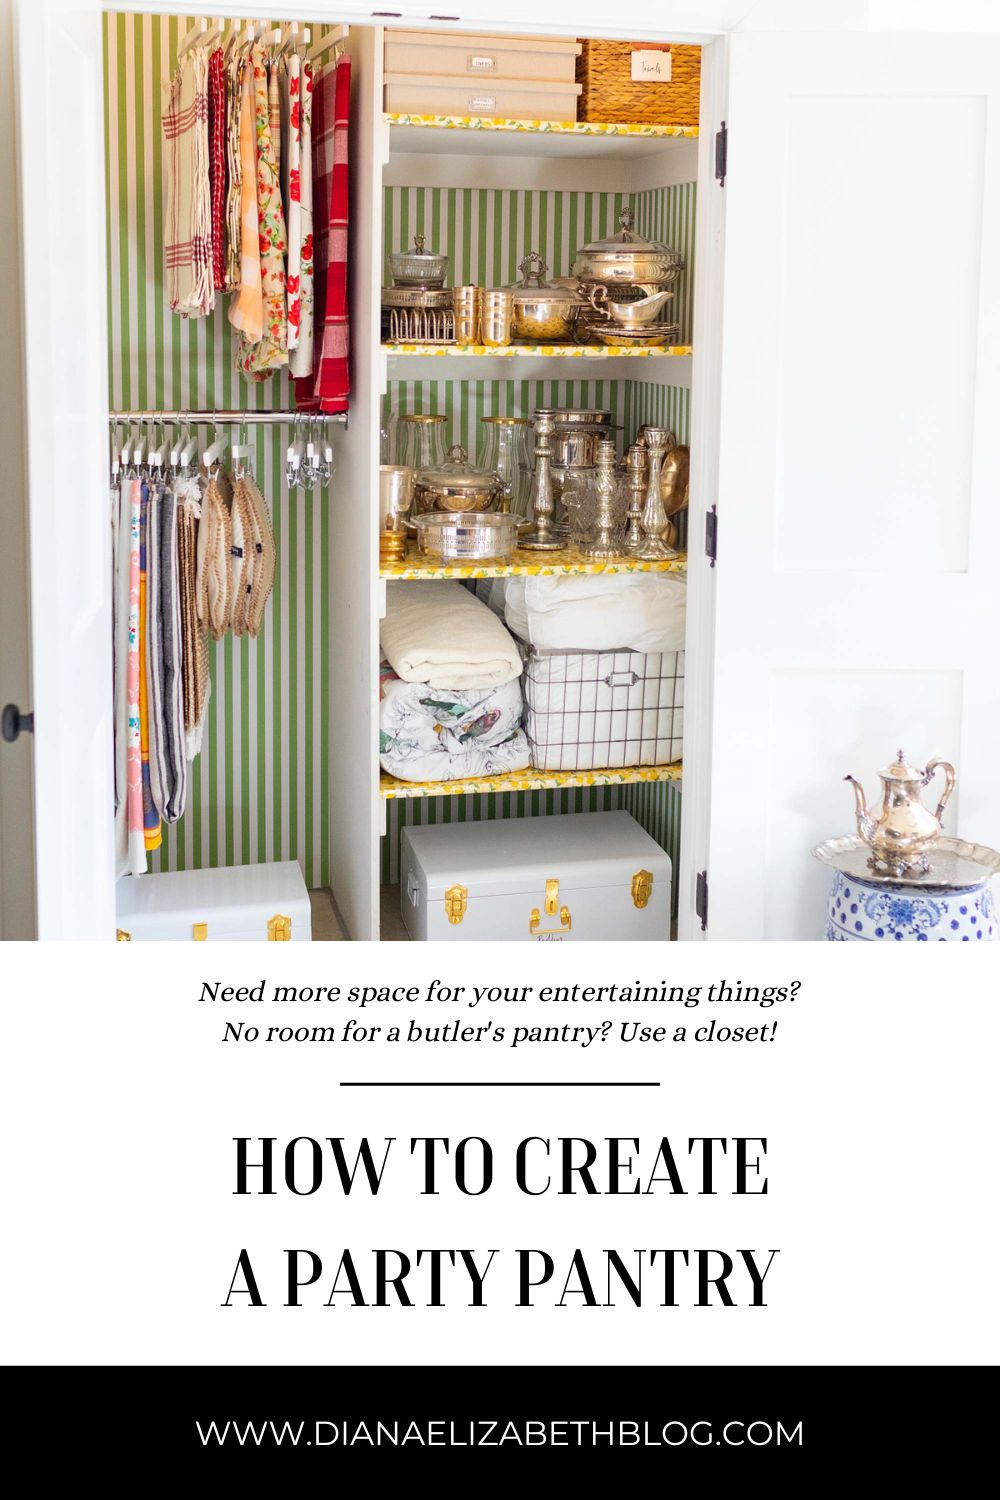 How to make a party pantry/entertaining closet if you don't have a butler's pantry